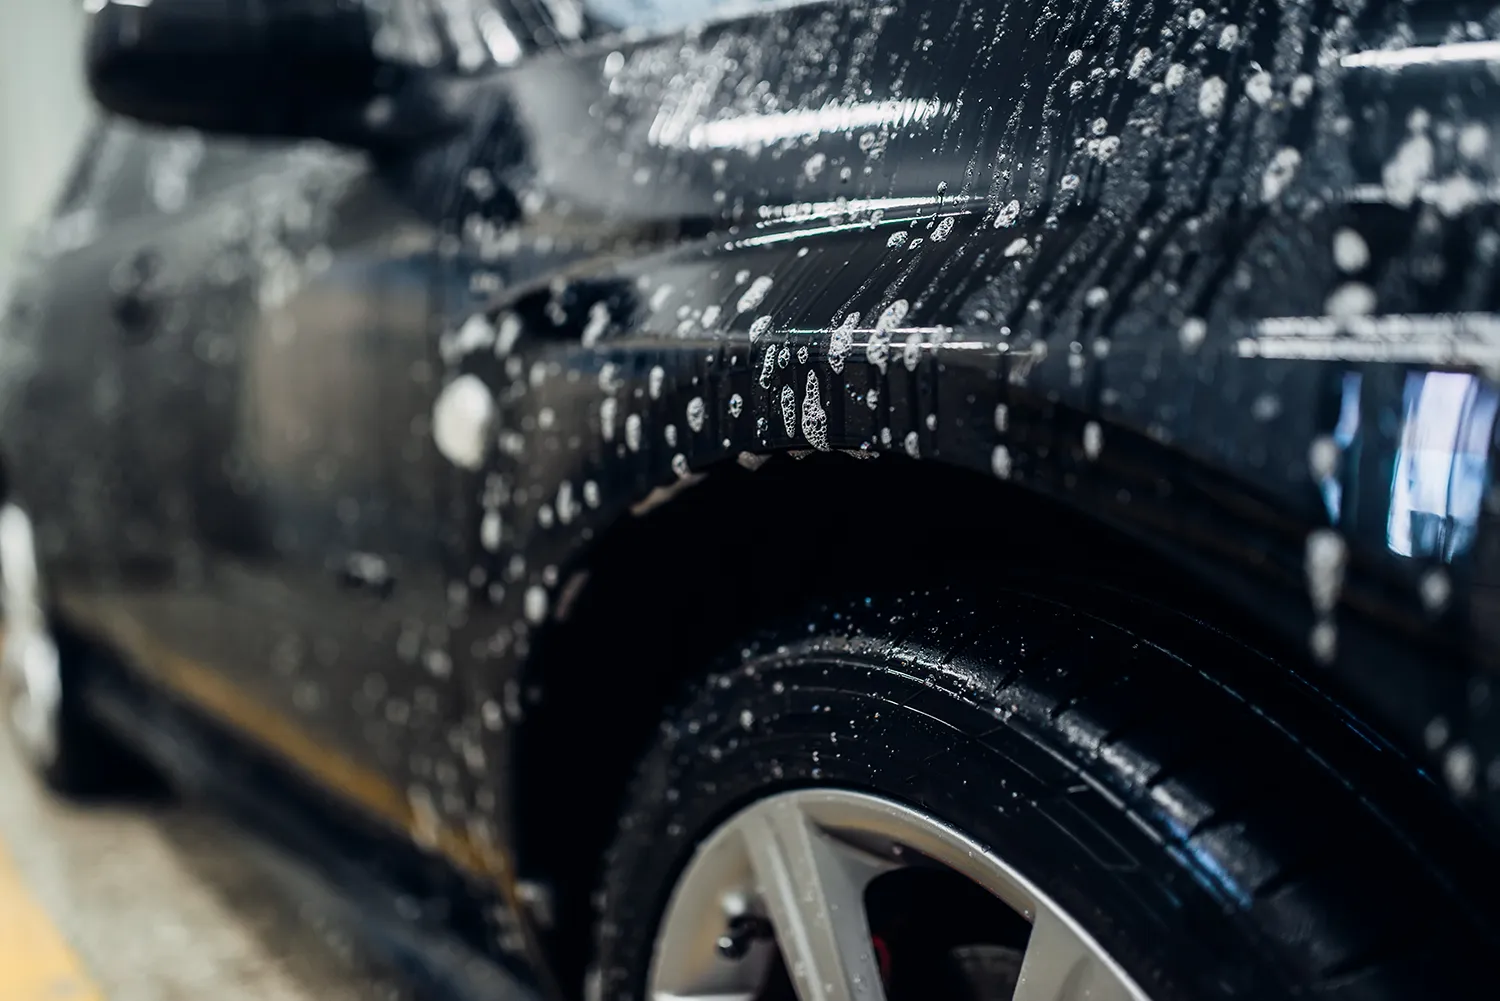 Chilliwack Express Automotive Detailers - Rise N' Shine Mobile Detailing Express Car Cleaning. Chilliwack's Pro Detail Company is Mobile. Ask About The Express Car Cleaning Service.